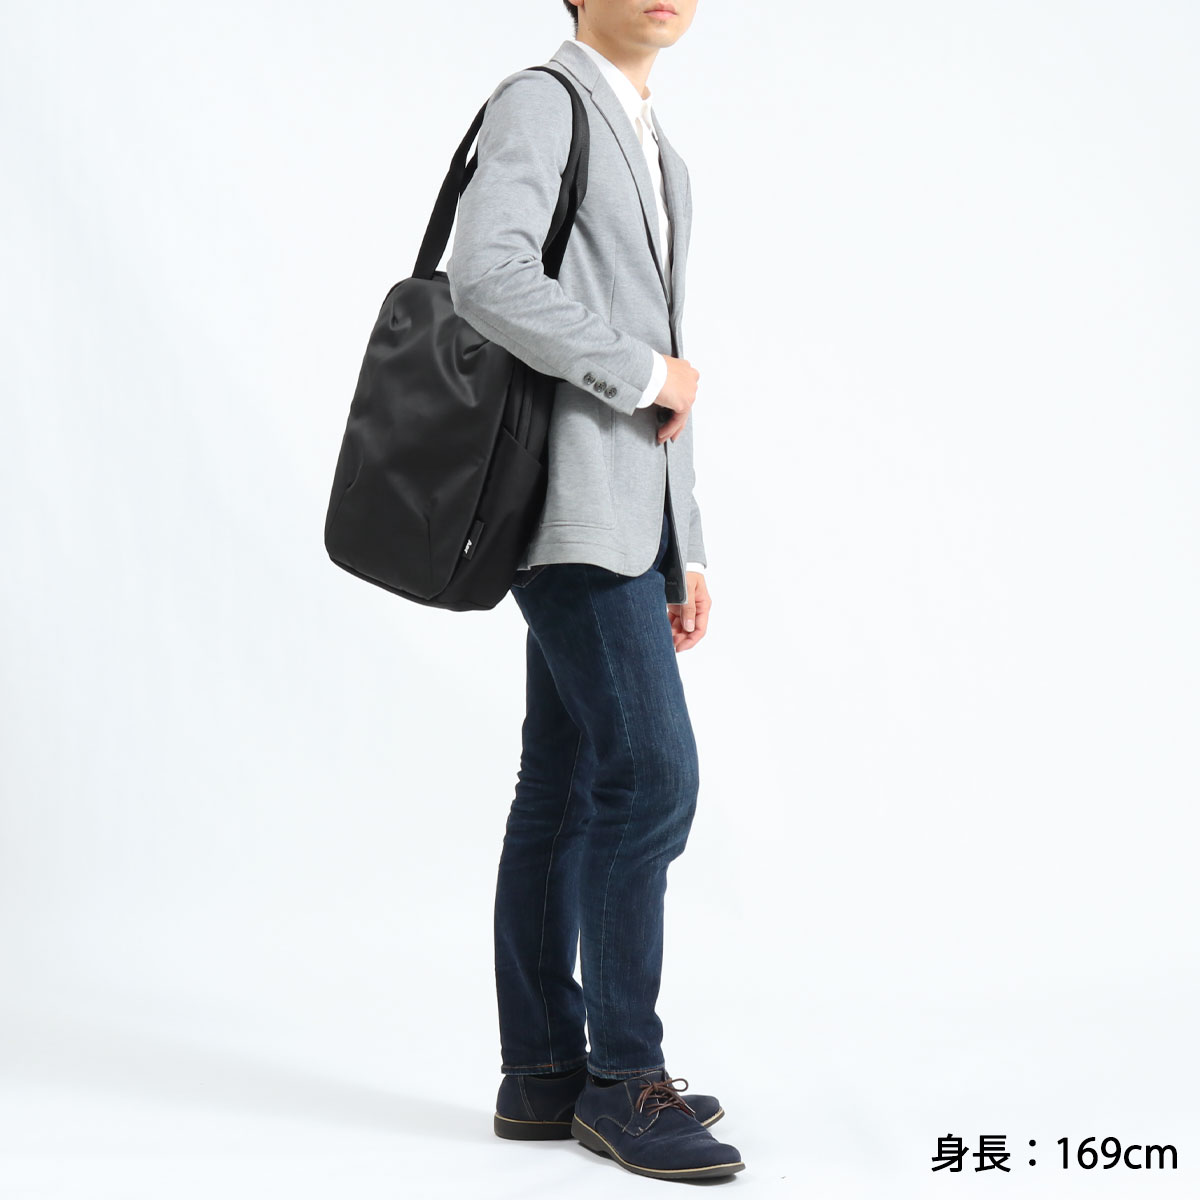 Aer エアー Work Collection Tech Tote トートバッグ 12.5L 31013 